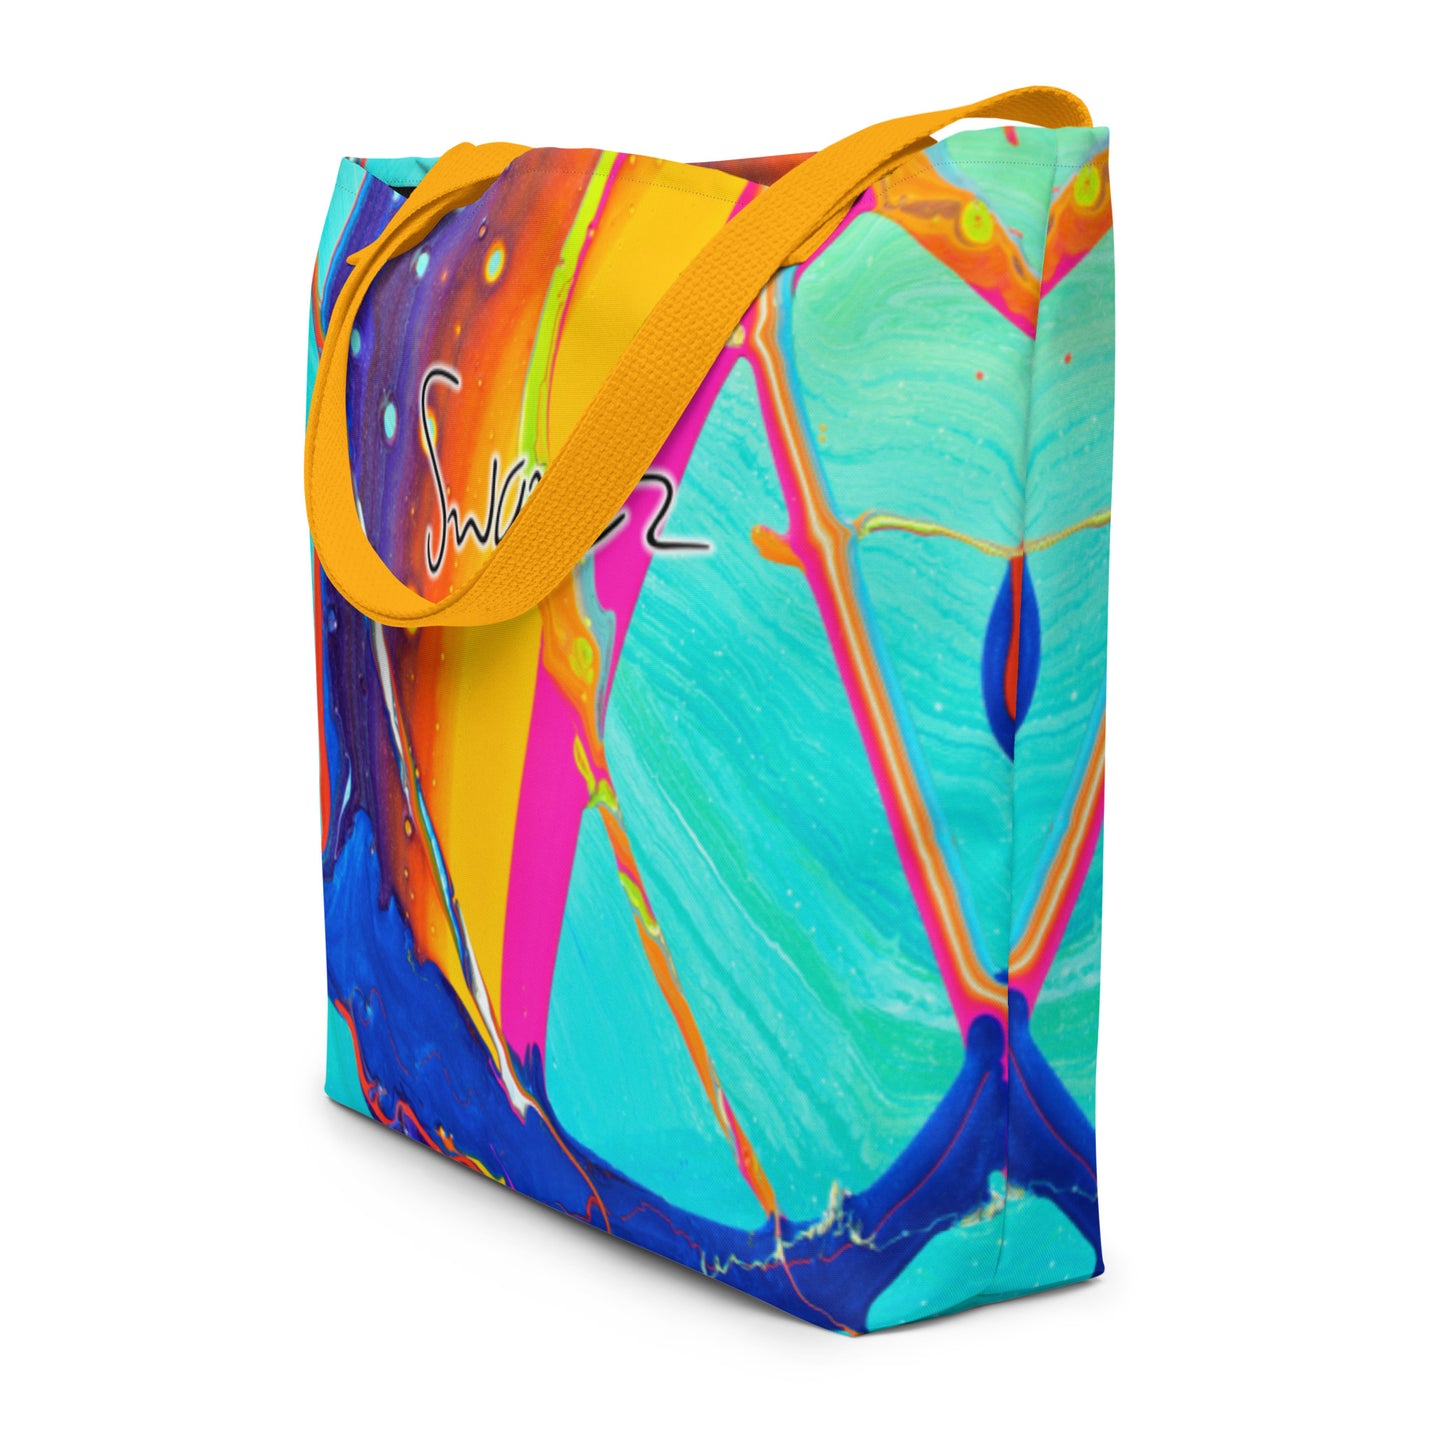 All-Over Print Large Tote Bag - Rainbow design